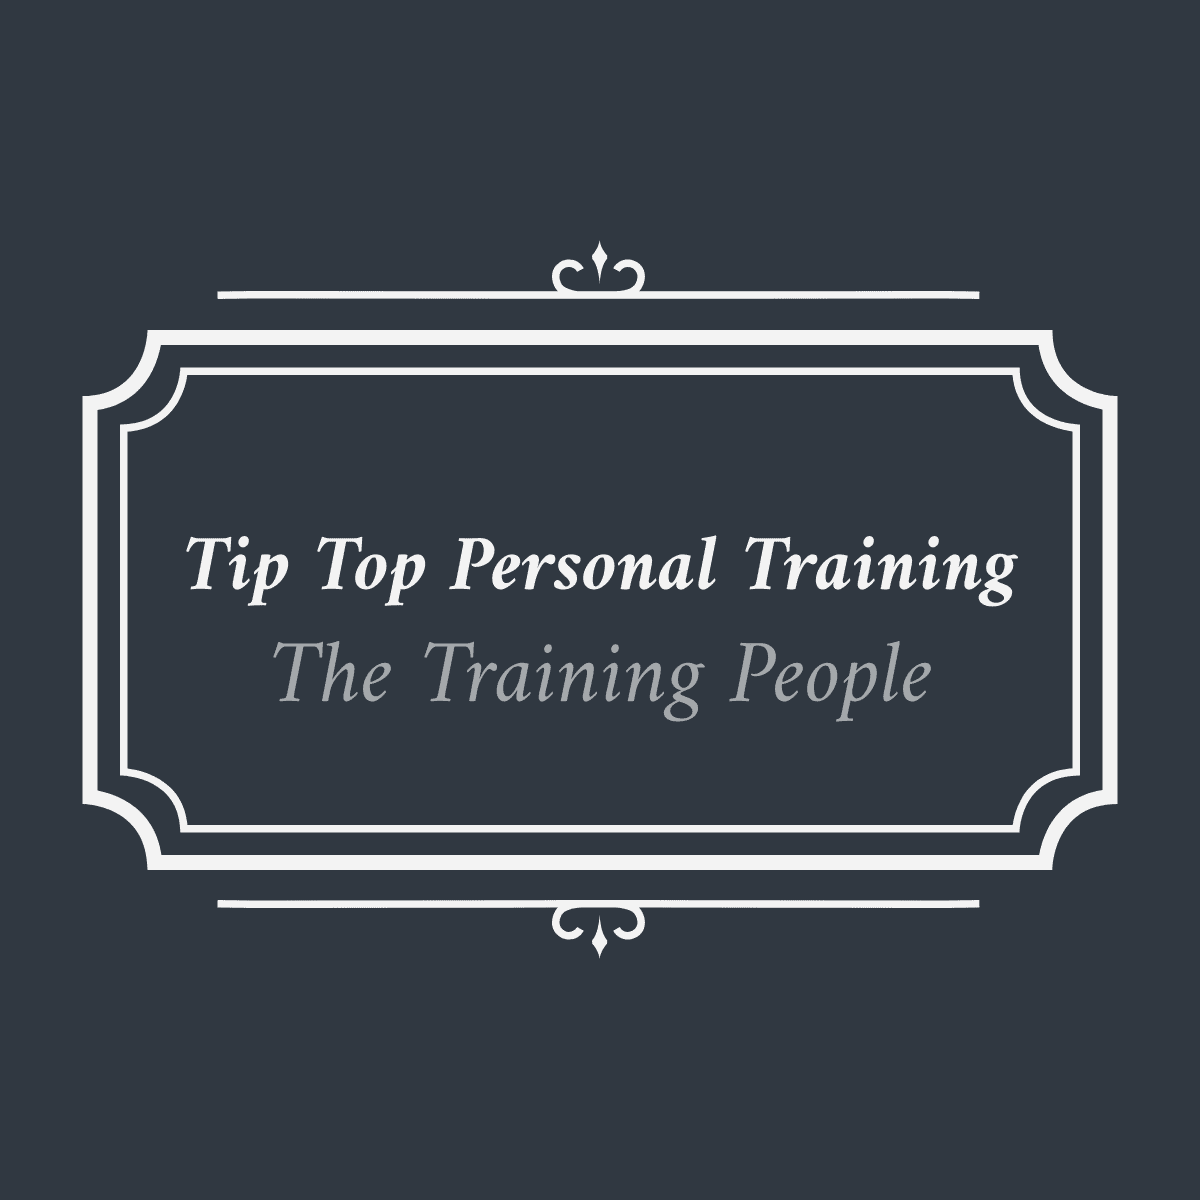 Tip Top Personal Training